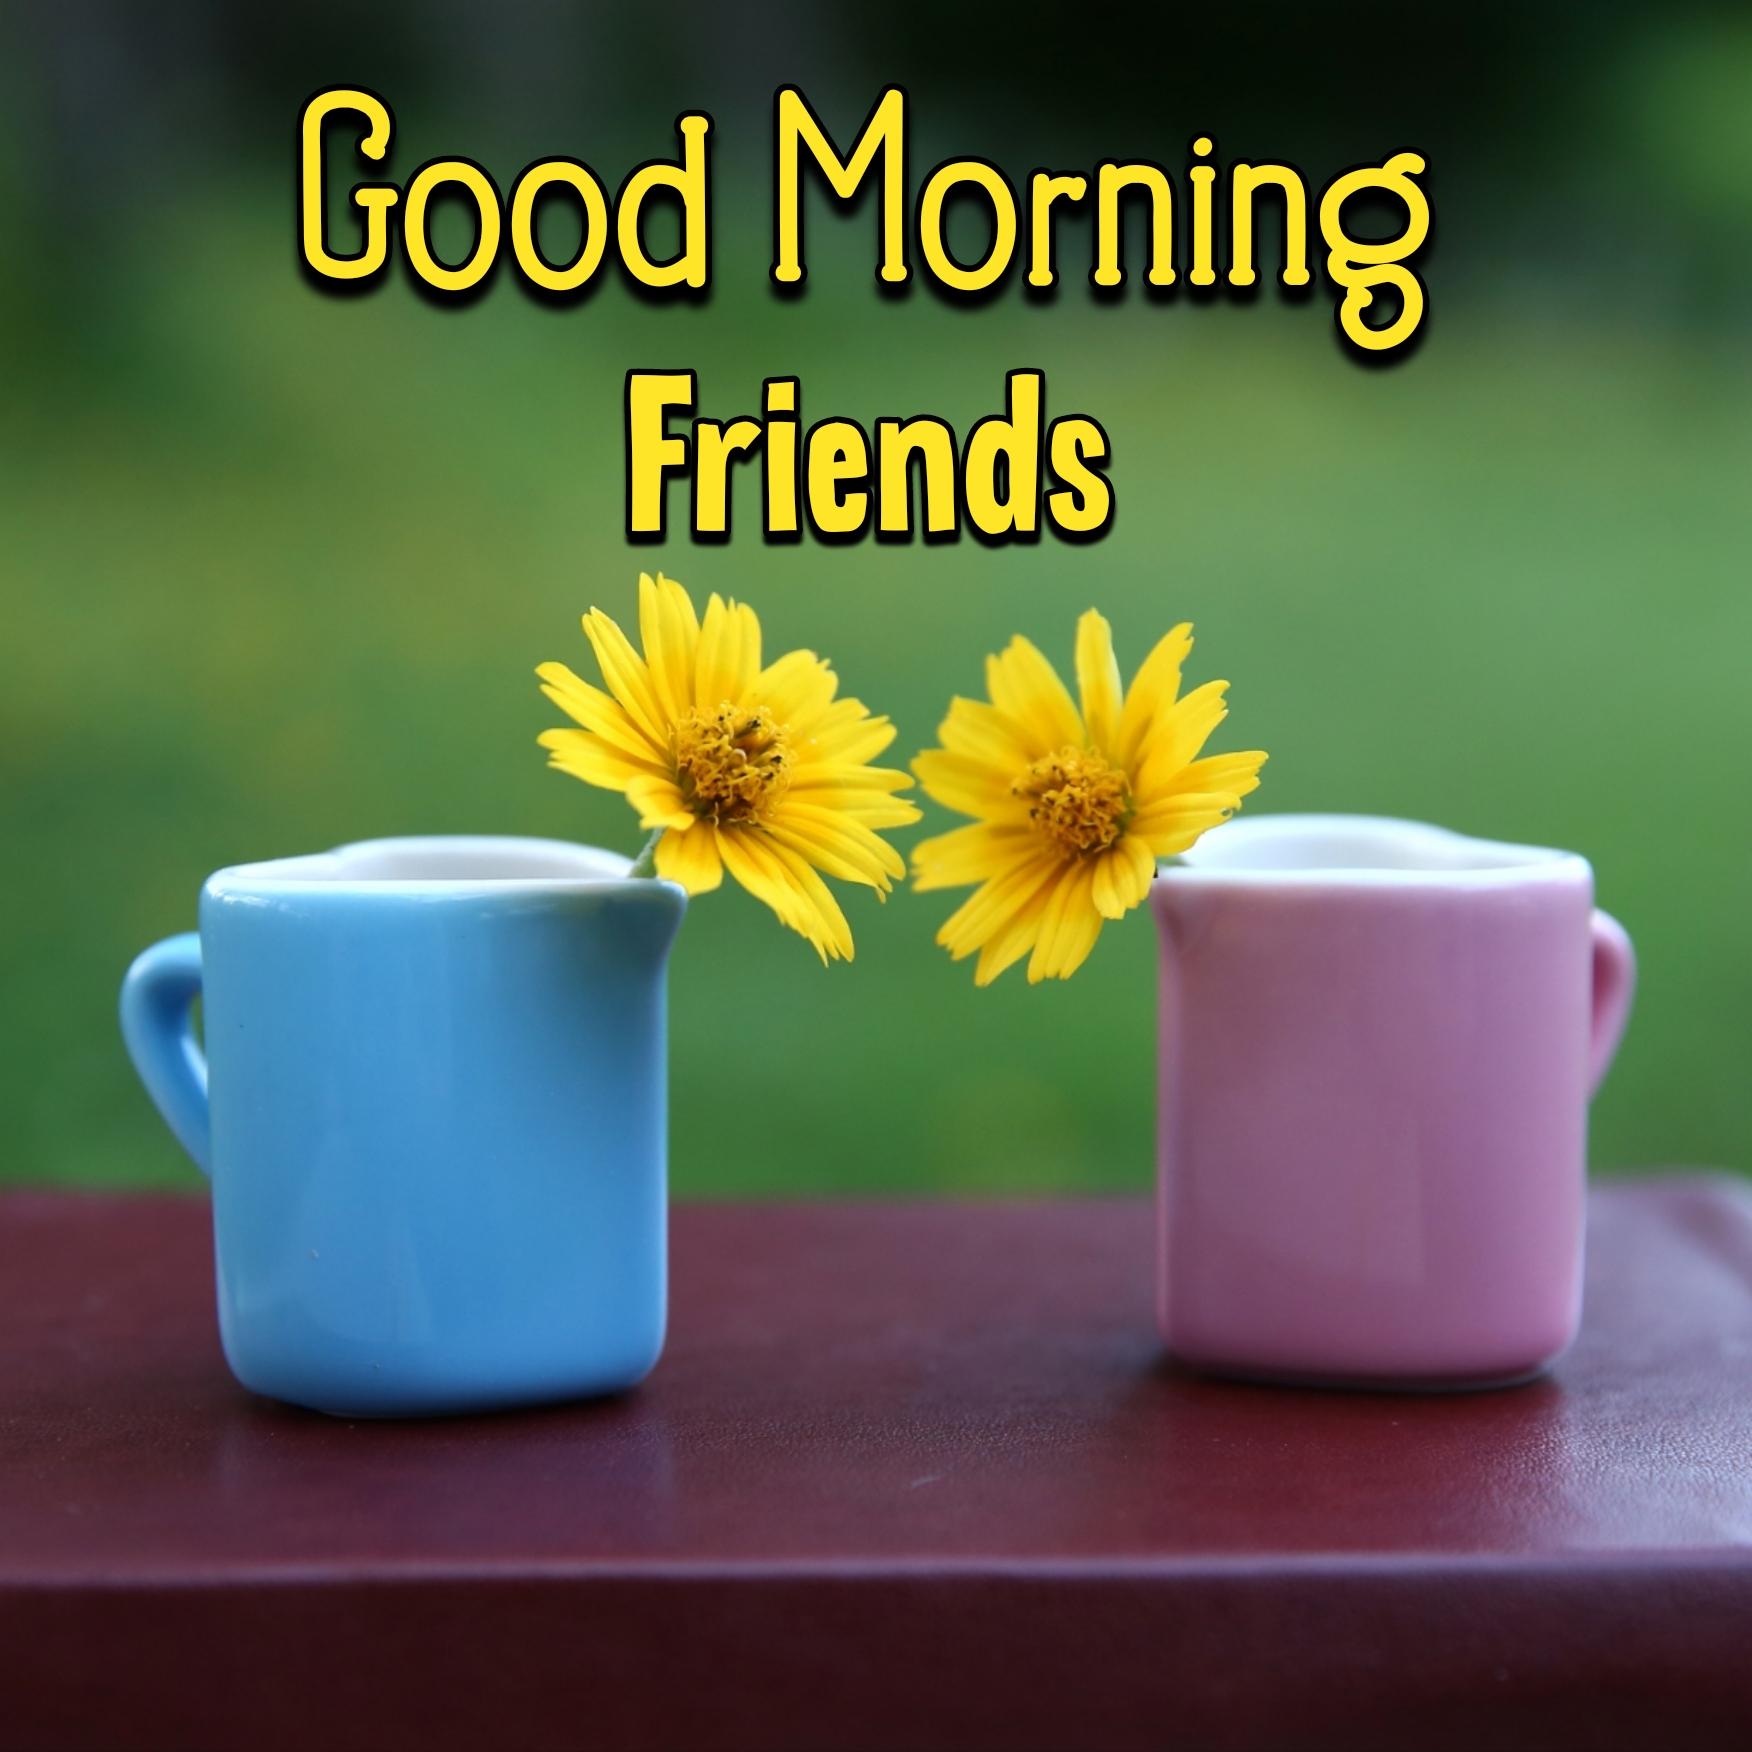 Friend Beautiful Good Morning Images